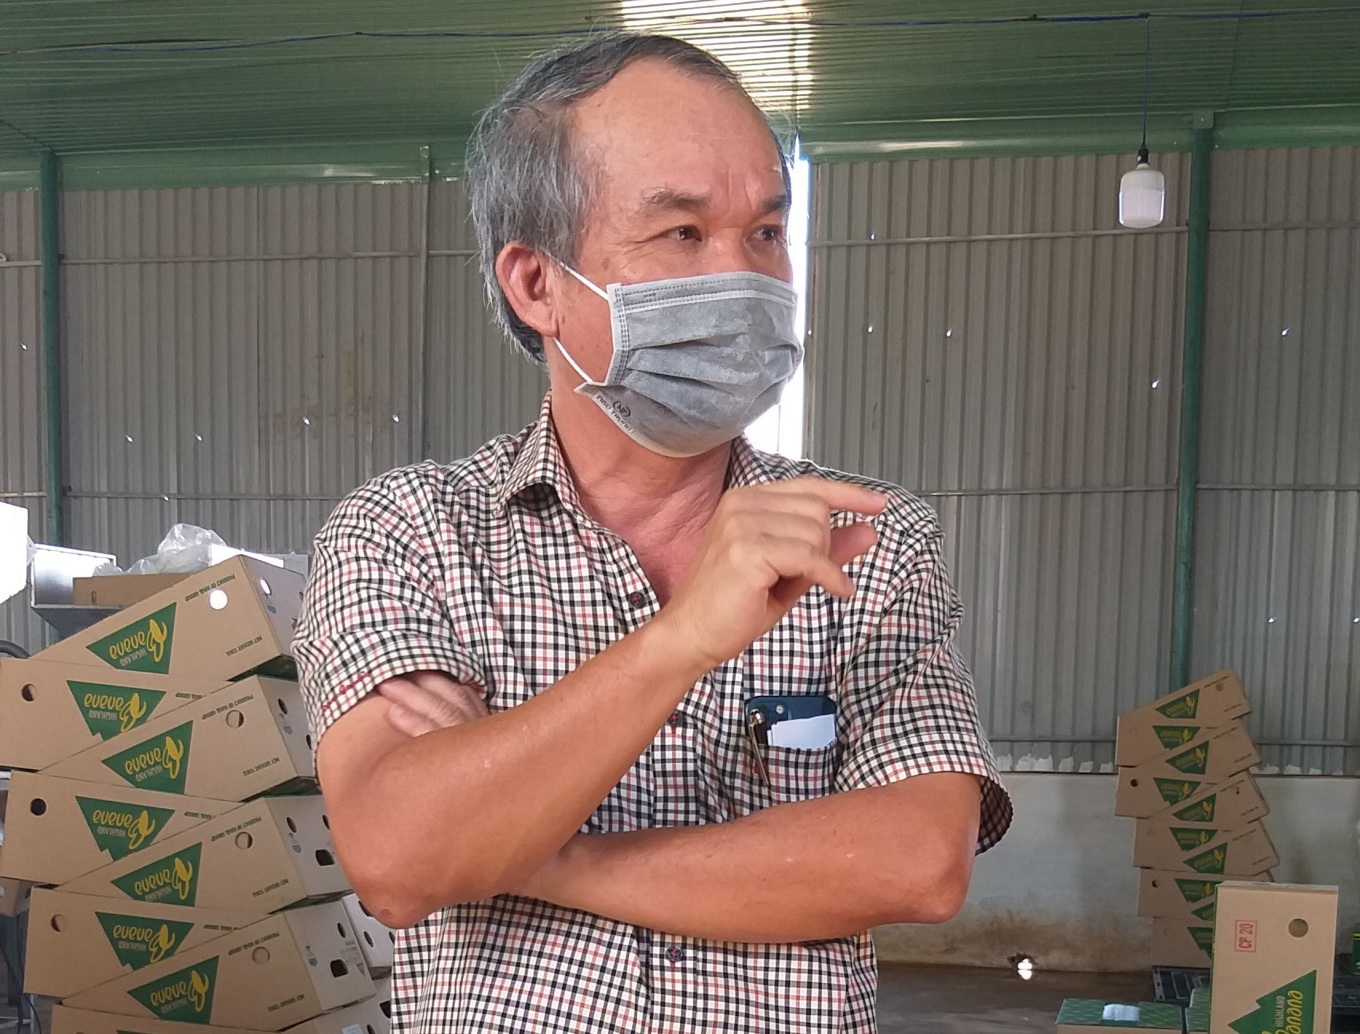 Hoang Anh Gia Lai chairman Doan Nguyen Duc at a banana packaging facility in the Central Highlands province of Gia Lai. Photo by VnExpress/Thi Ha